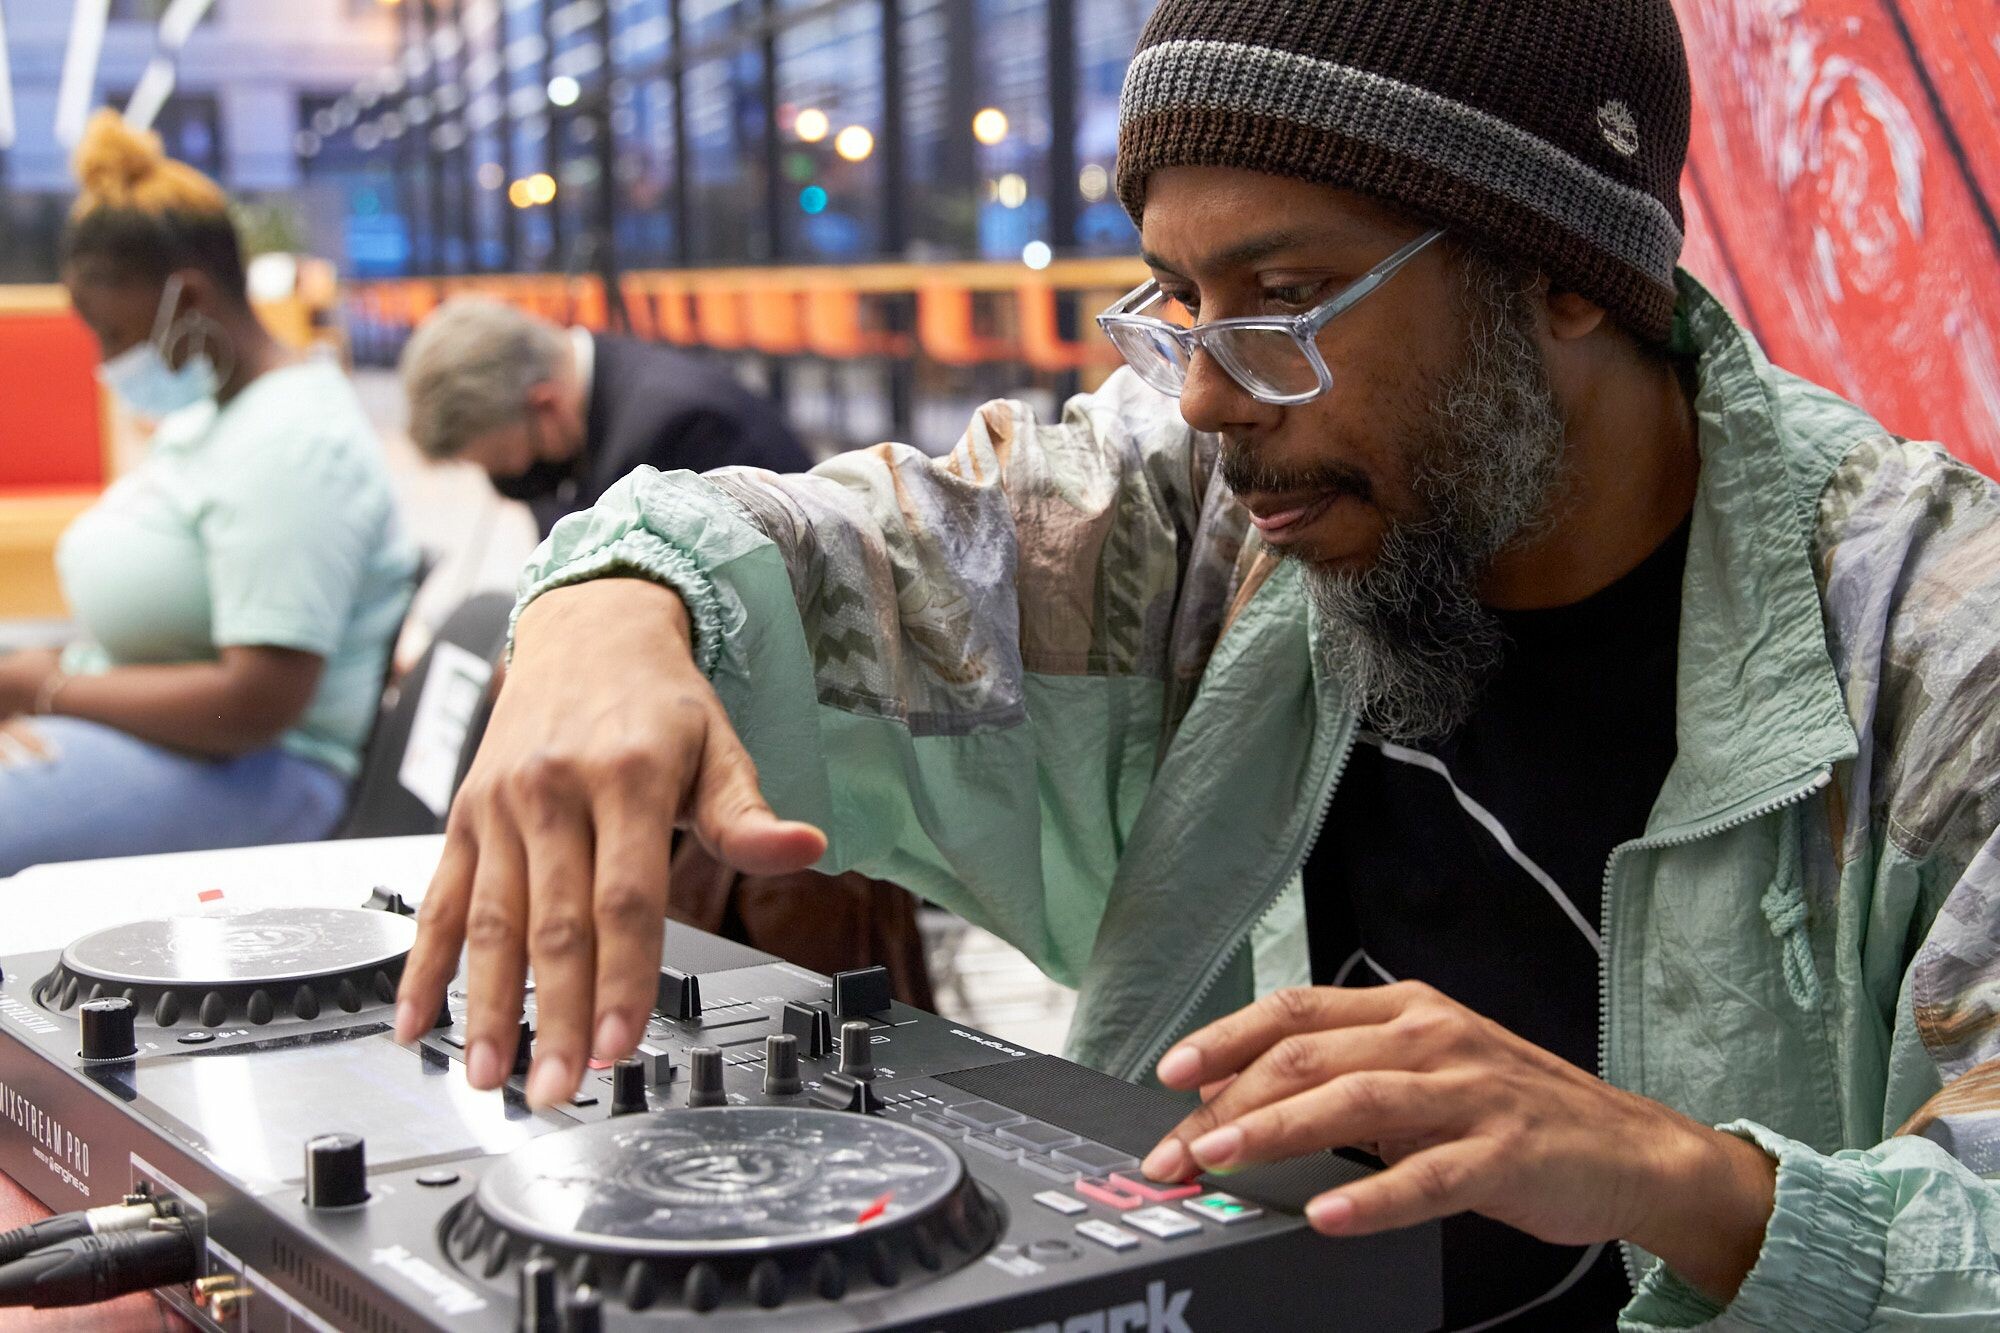 A man leans over his DJ set and concentrates during a performance.